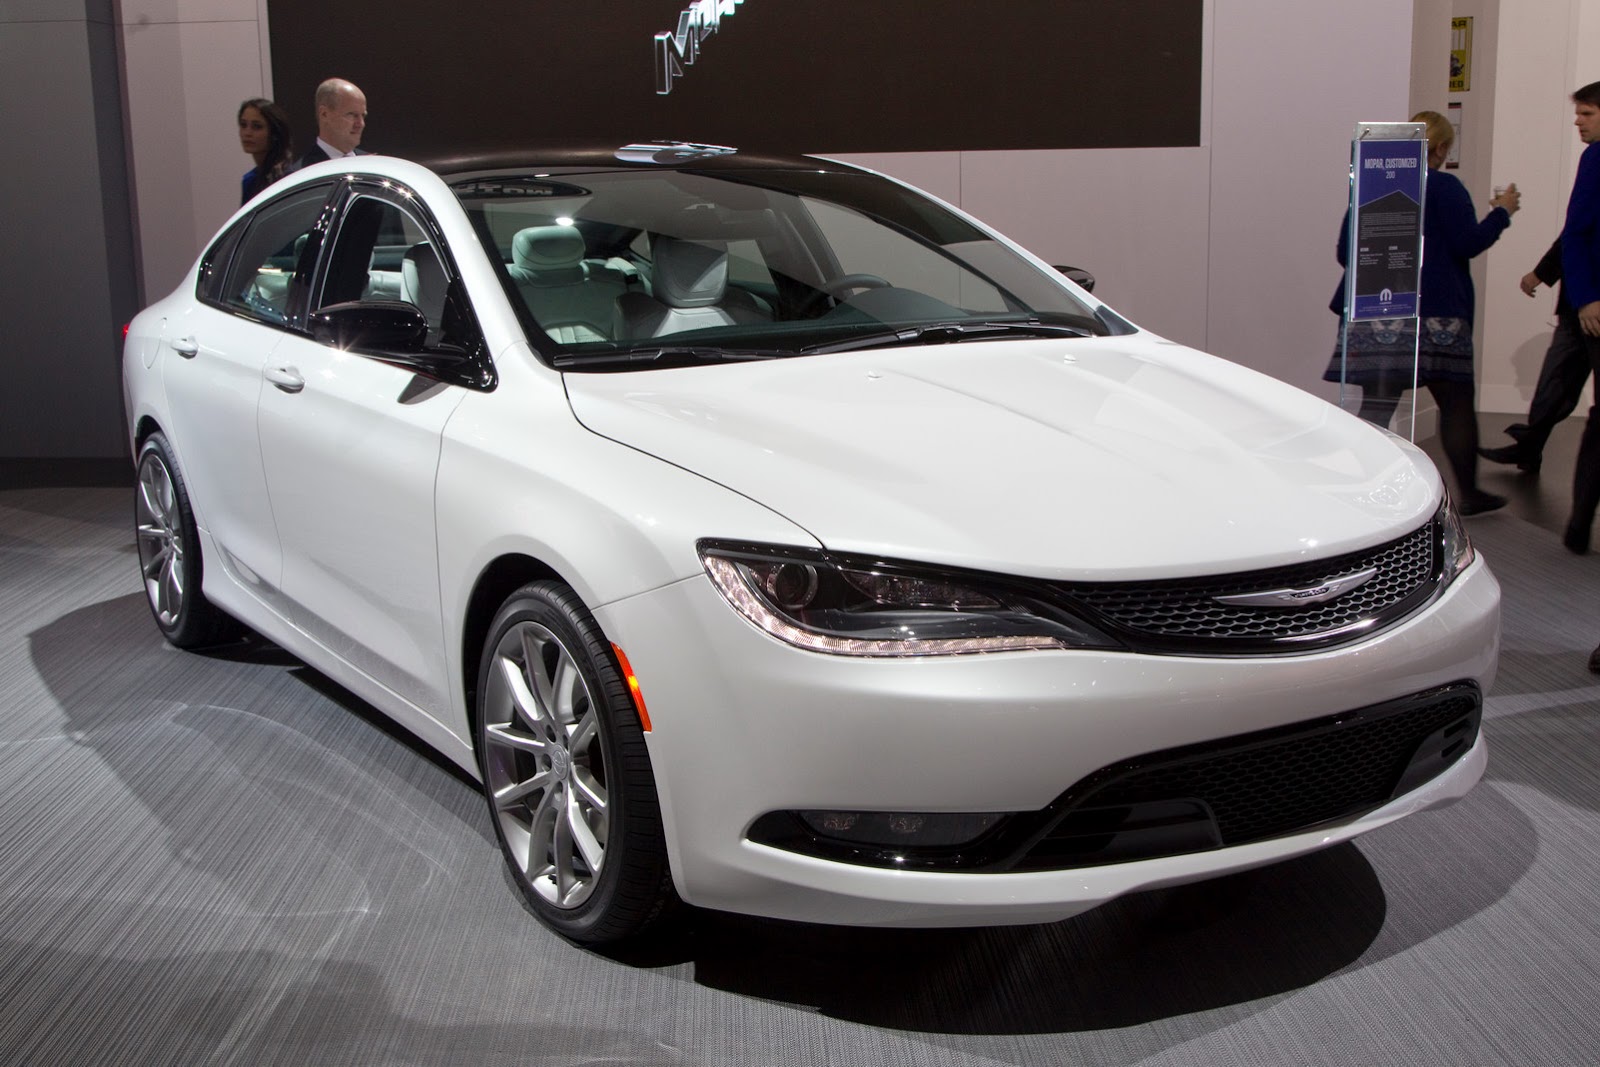 New Chrysler 200 Live Shots from Detroit, Plus Consumer Reports’ Quick